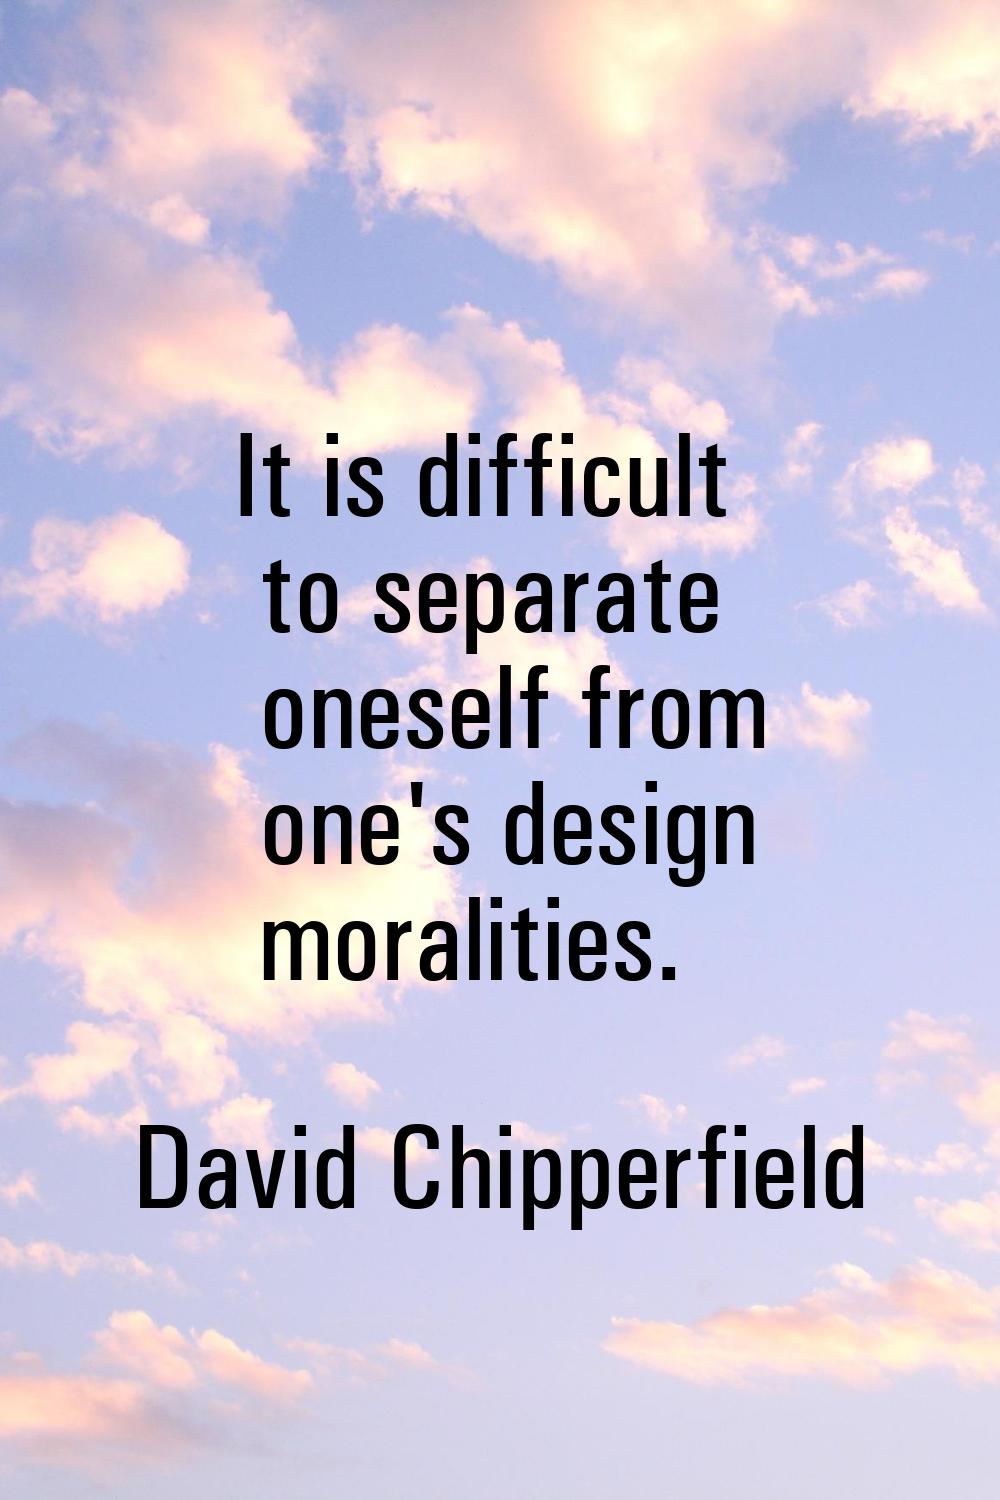 It is difficult to separate oneself from one's design moralities.